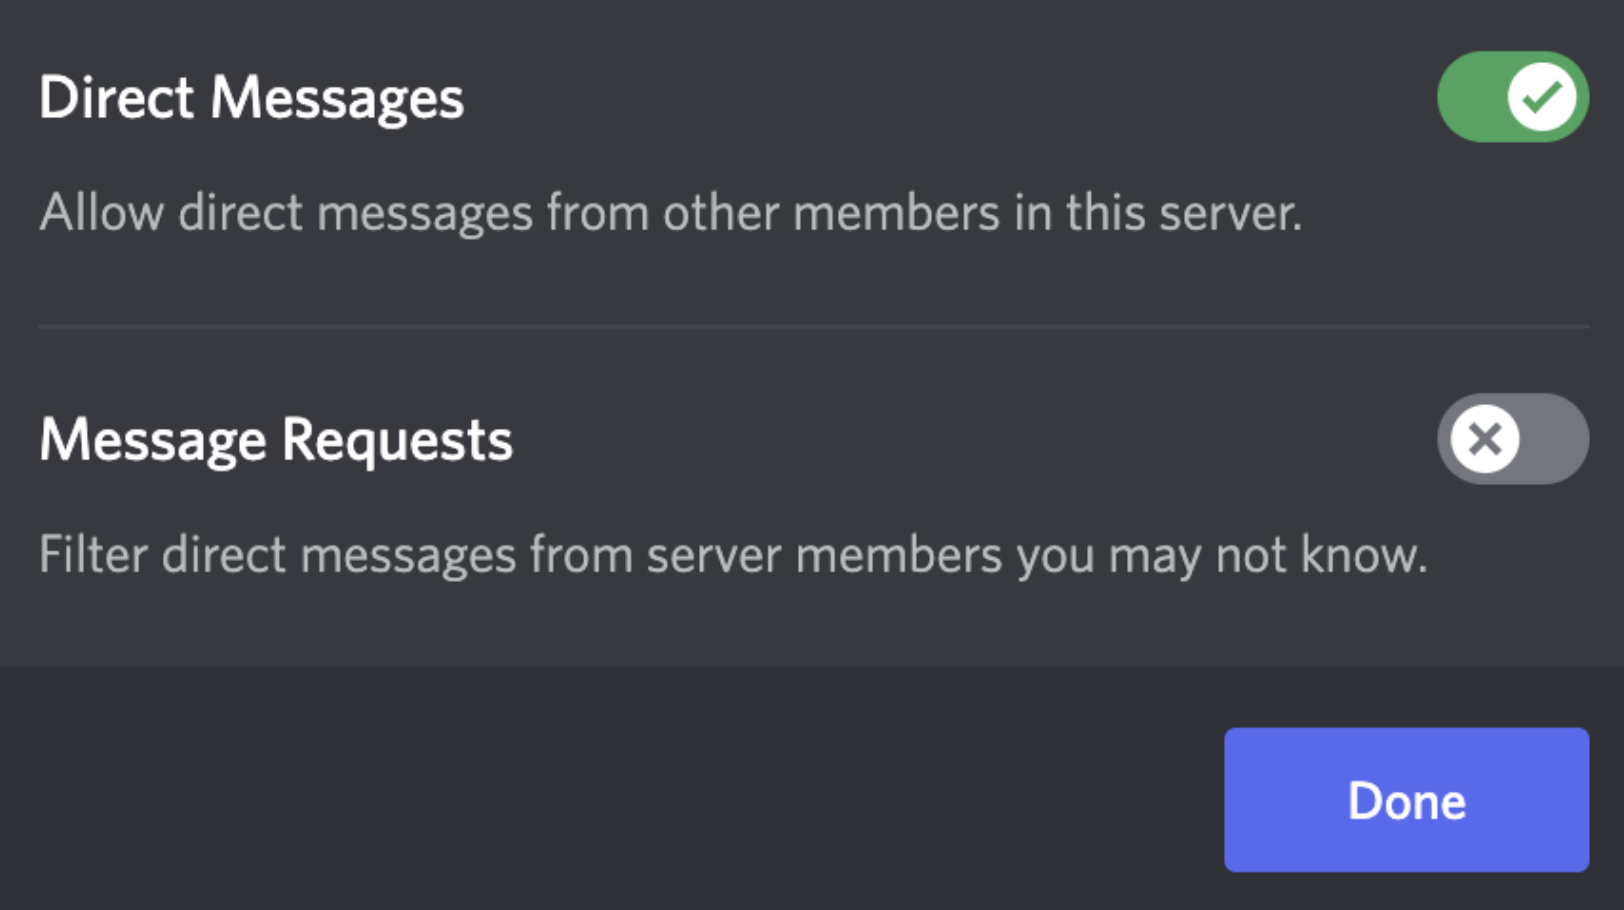 message-request-settings-options.png